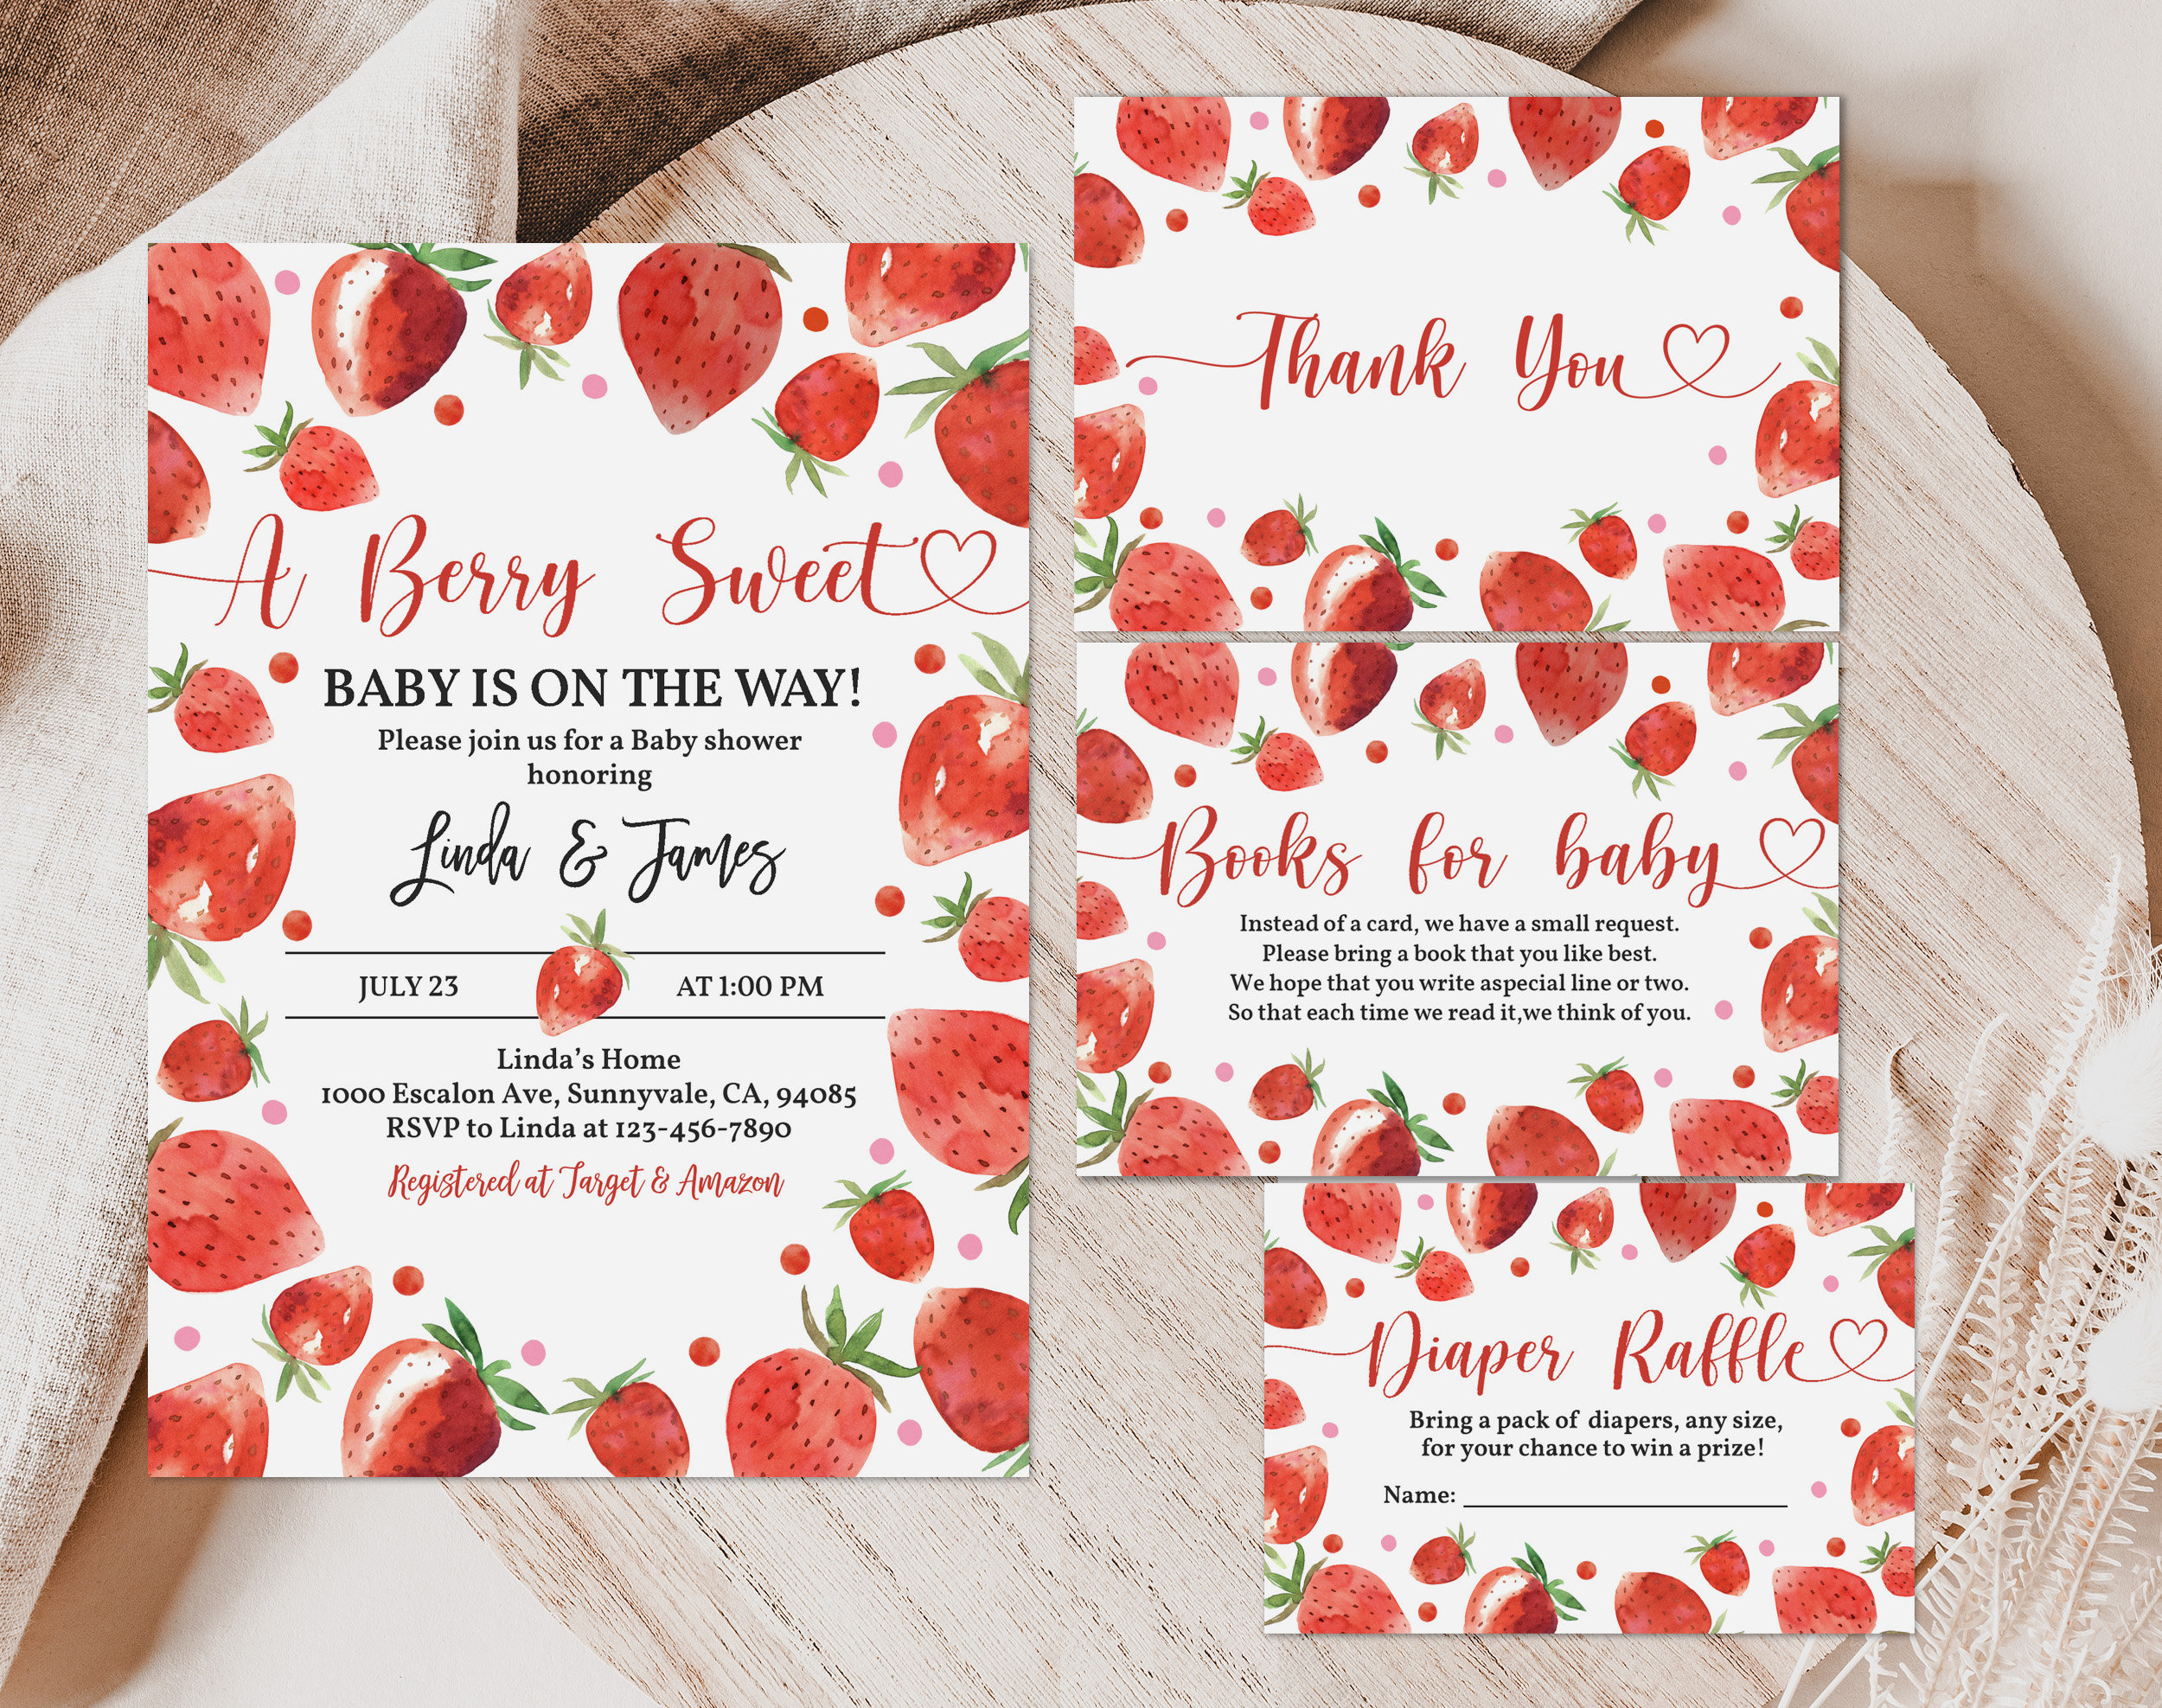 A Berry Sweet Baby is on the Way Baby Shower Welcome Sign 